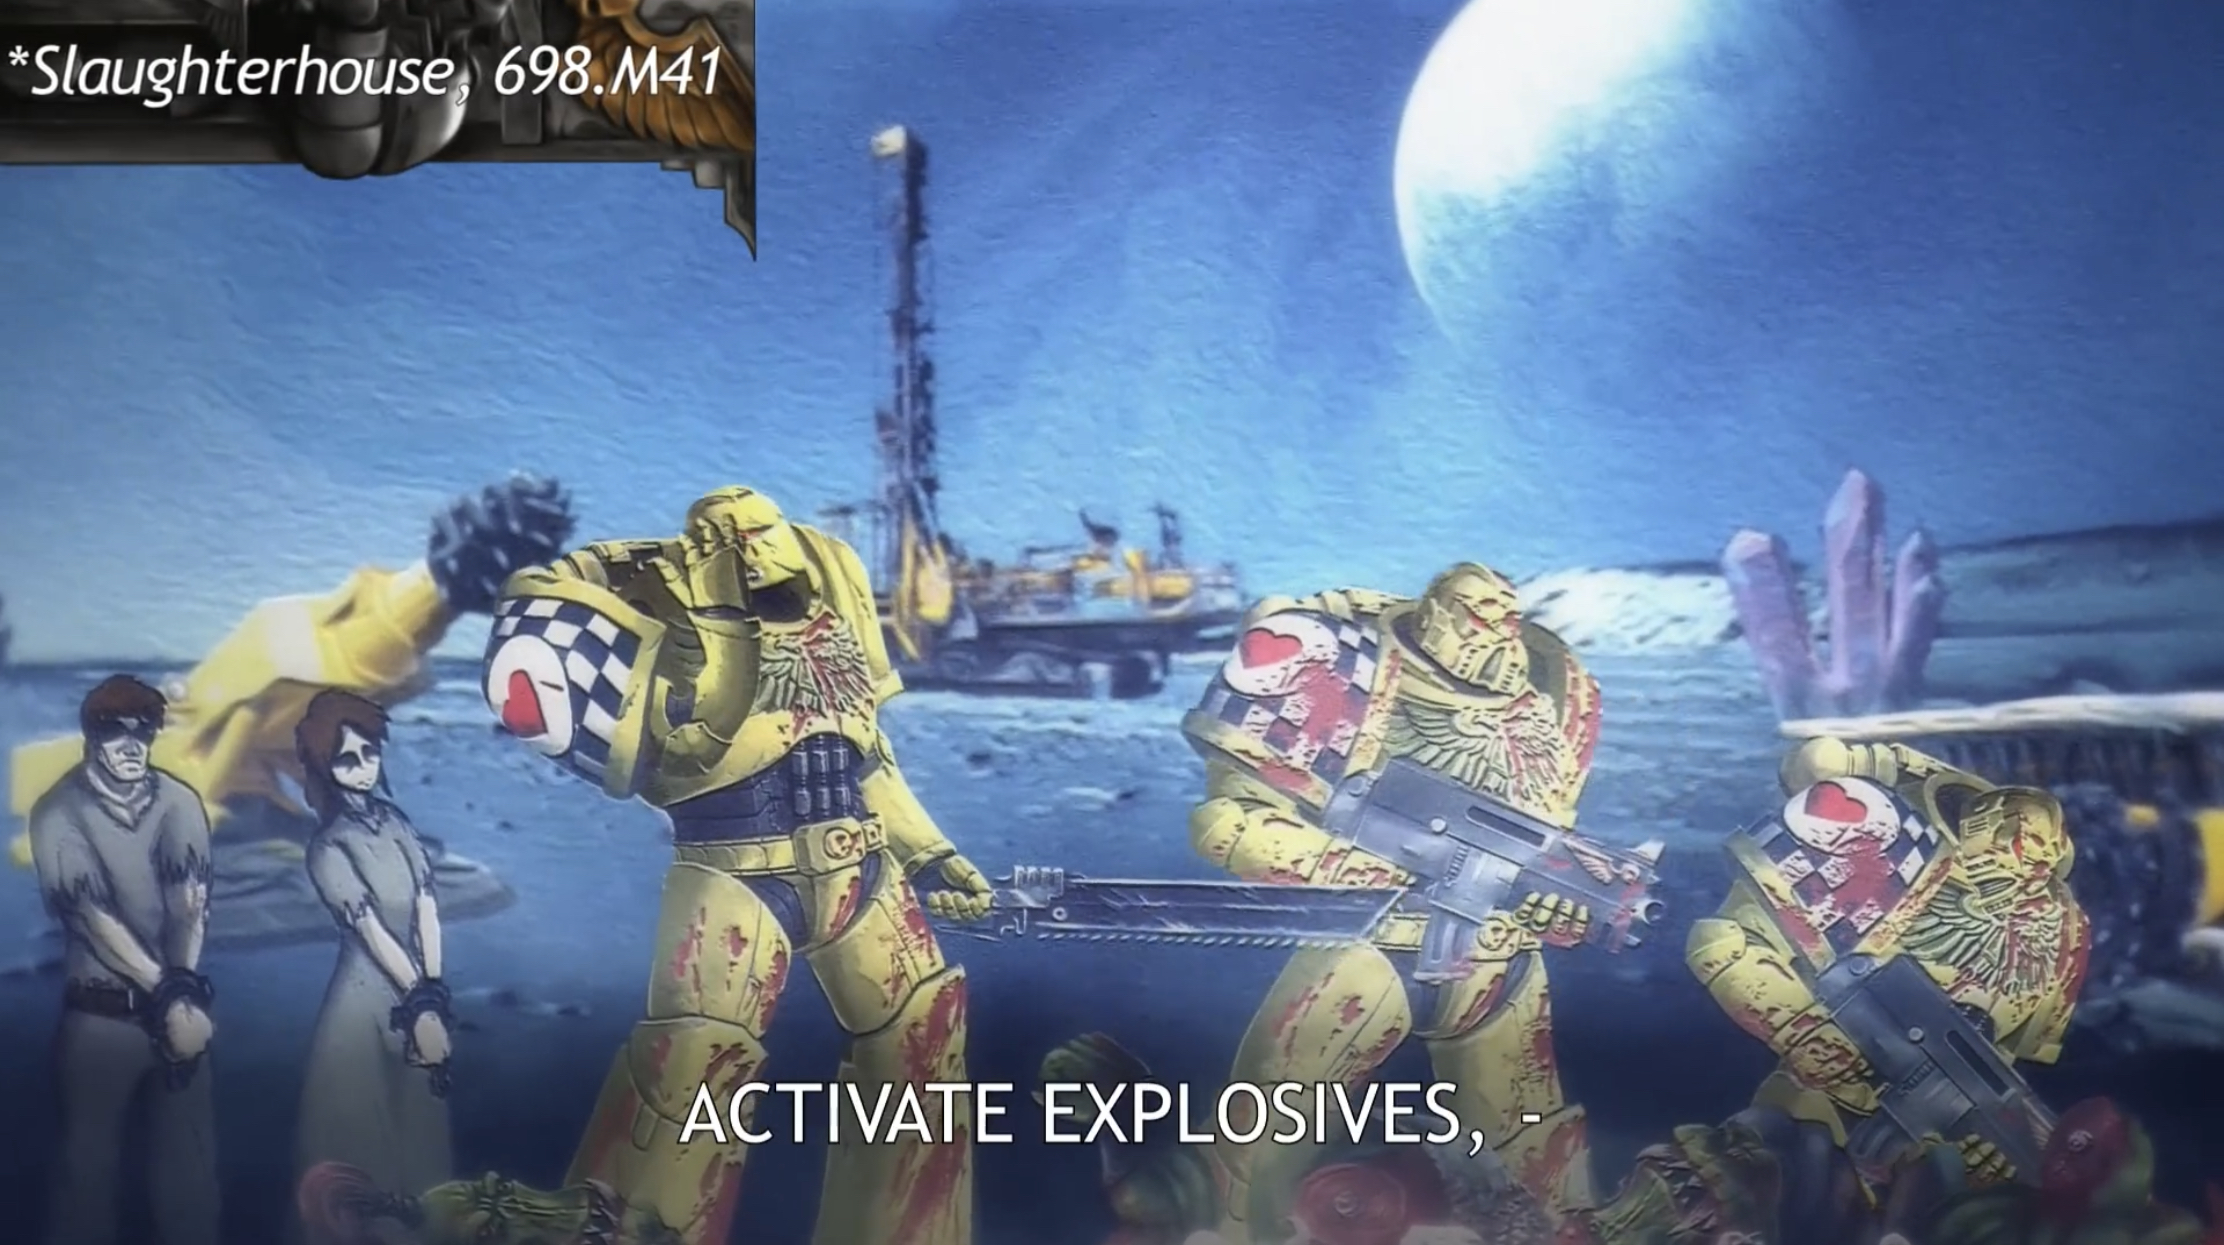 High Quality ACTIVATE EXPLOSIVES! Blank Meme Template